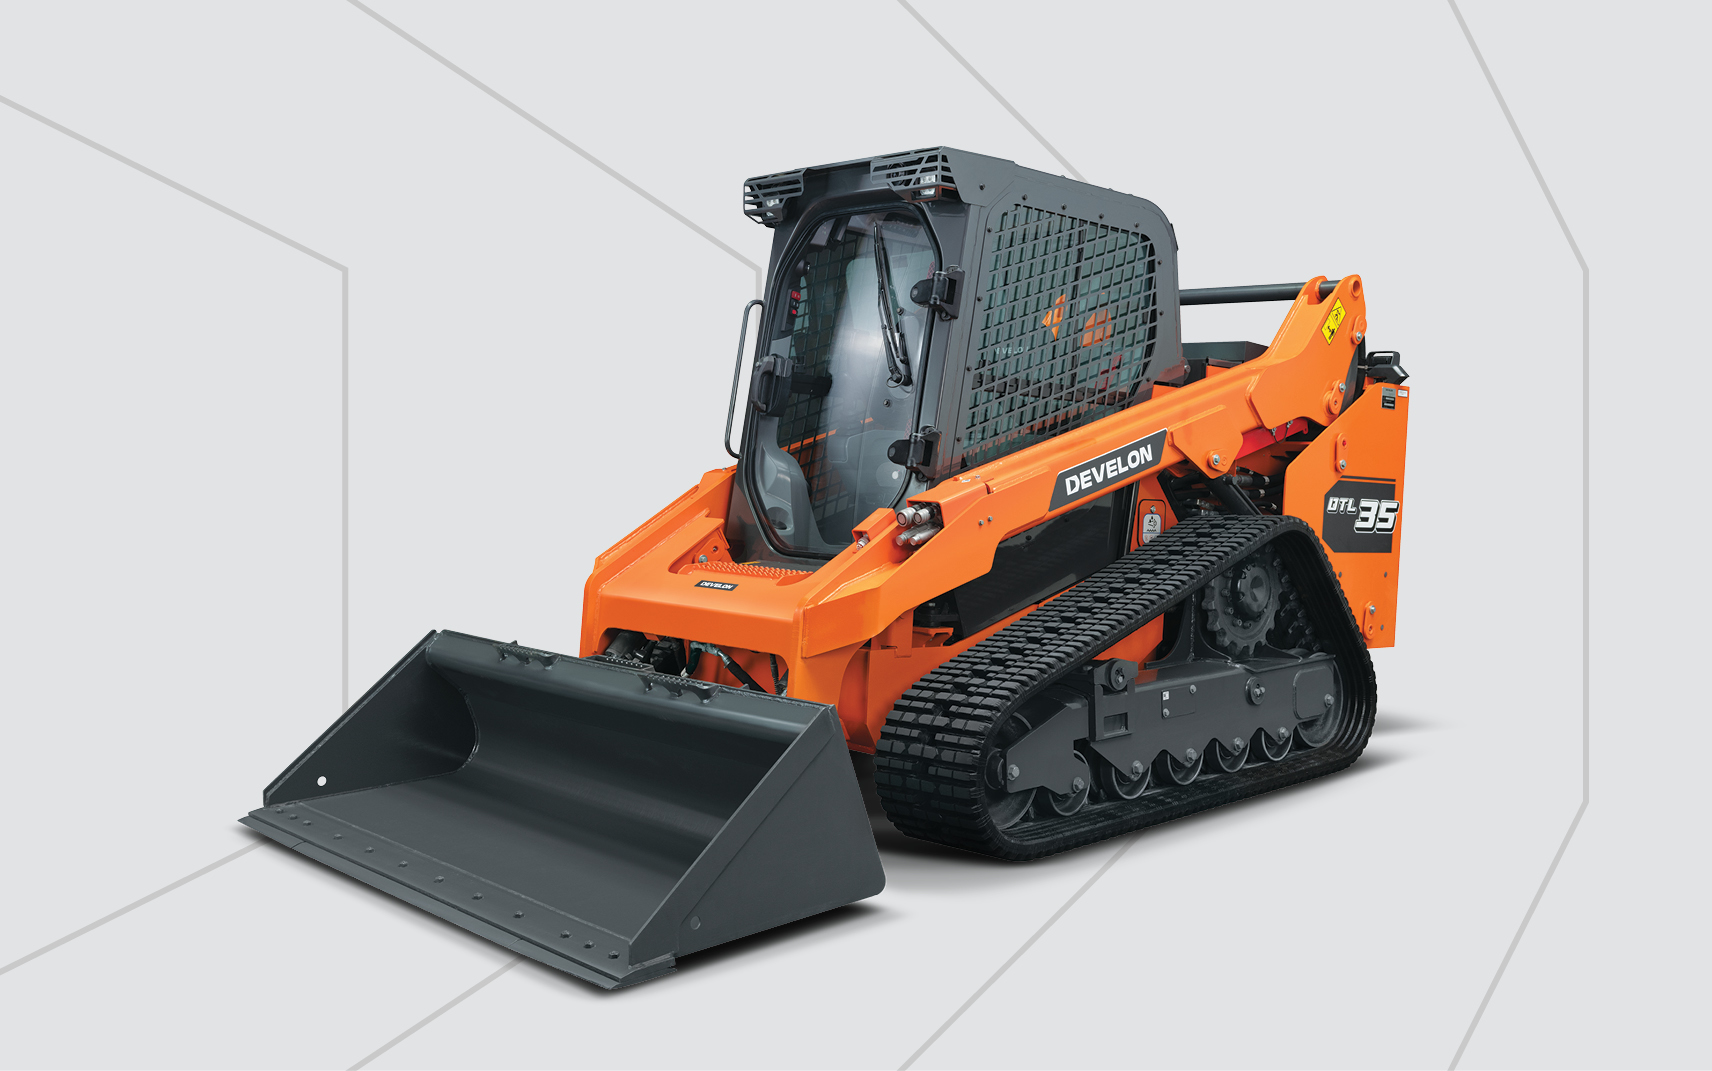 A DEVELON DTL35 Compact Track Loader in front of a grey background